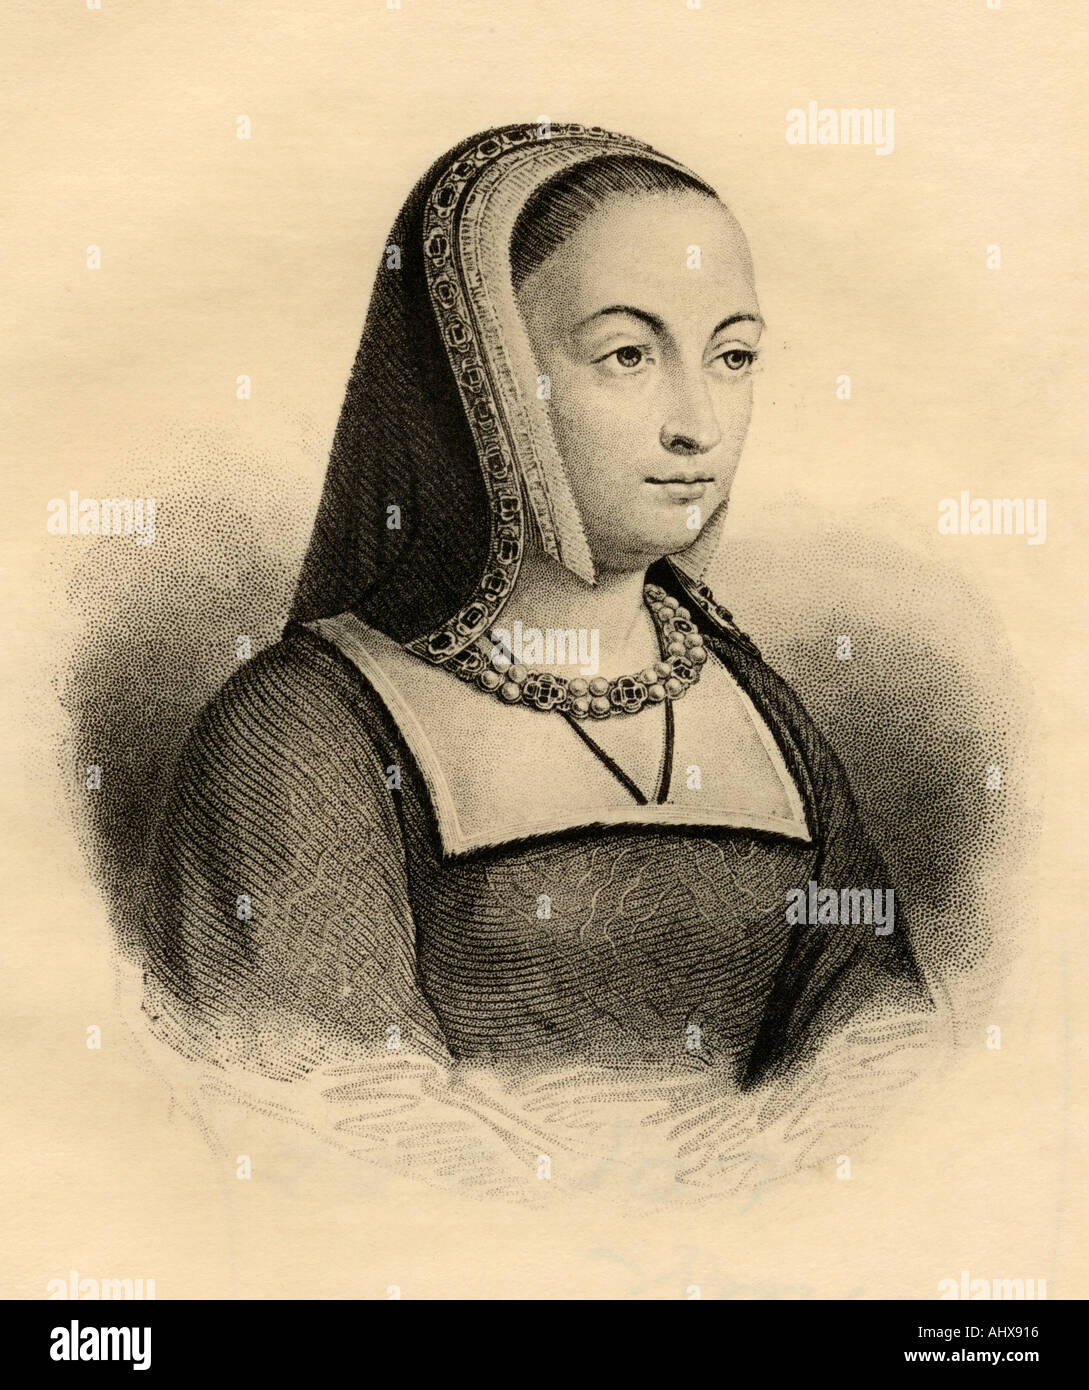 Anne of Brittany, 1477 - 1514. Queen consort of France as the wife of Charles VIII, 1491 - 1498 and of Louis XII, 1499 - 1514. Stock Photo